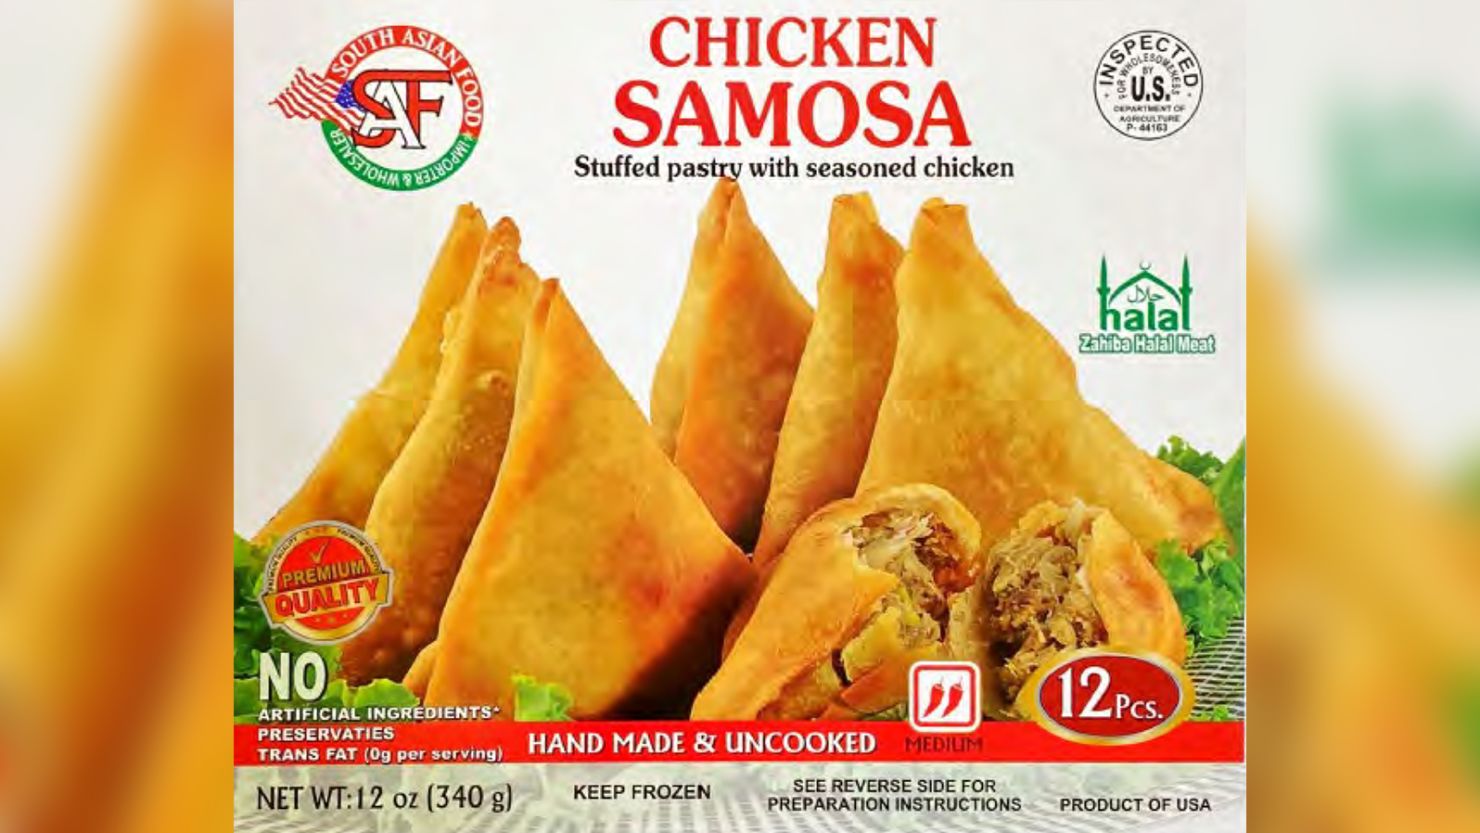 South Asian Food Chicken Samosas could contain an allergen, FSIS said.